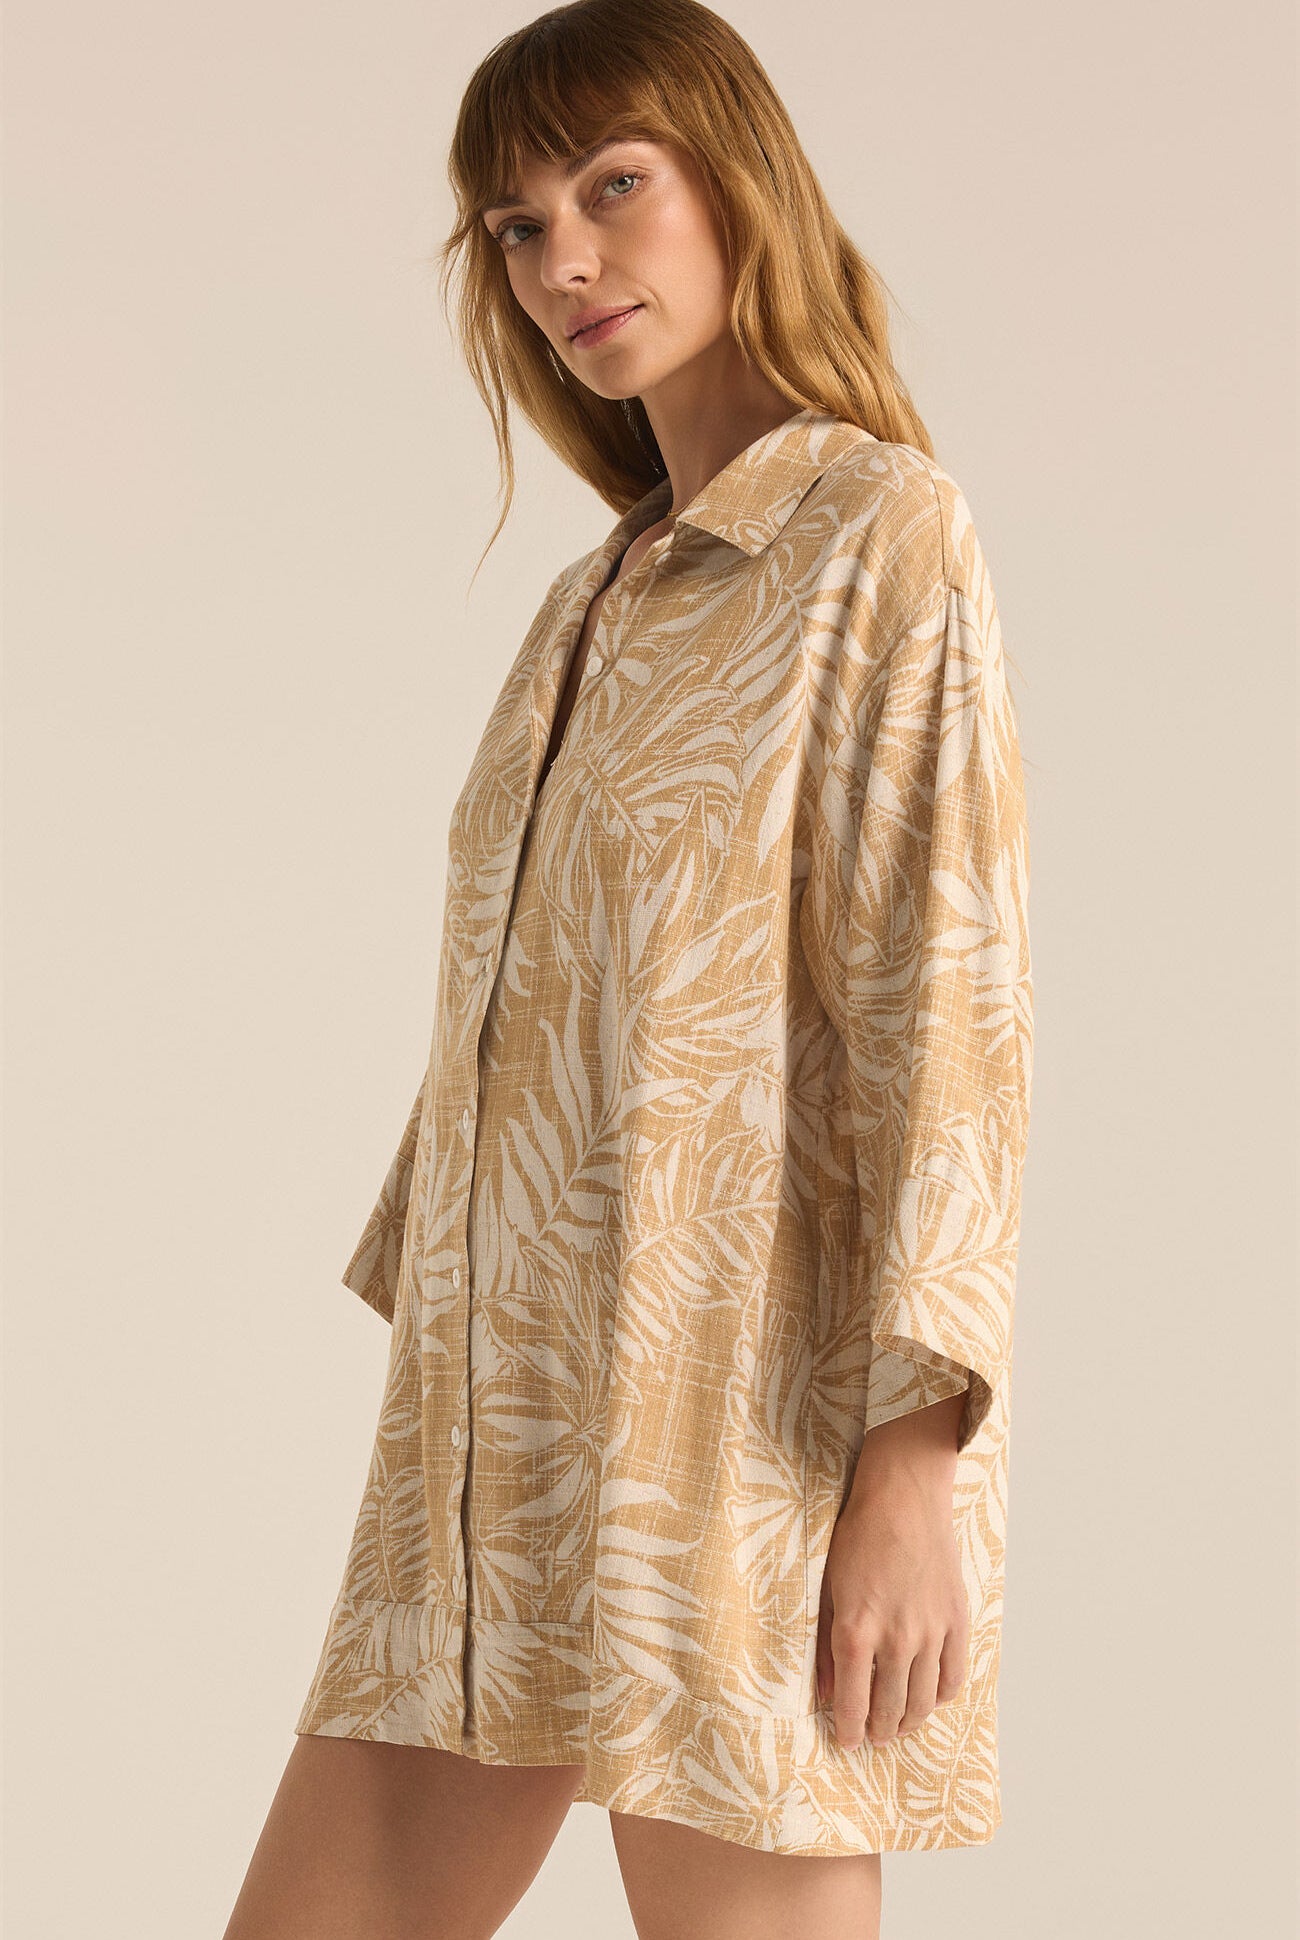 Camden Sandy Bay Palm Tunic Dress-Dresses-Vixen Collection, Day Spa and Women's Boutique Located in Seattle, Washington